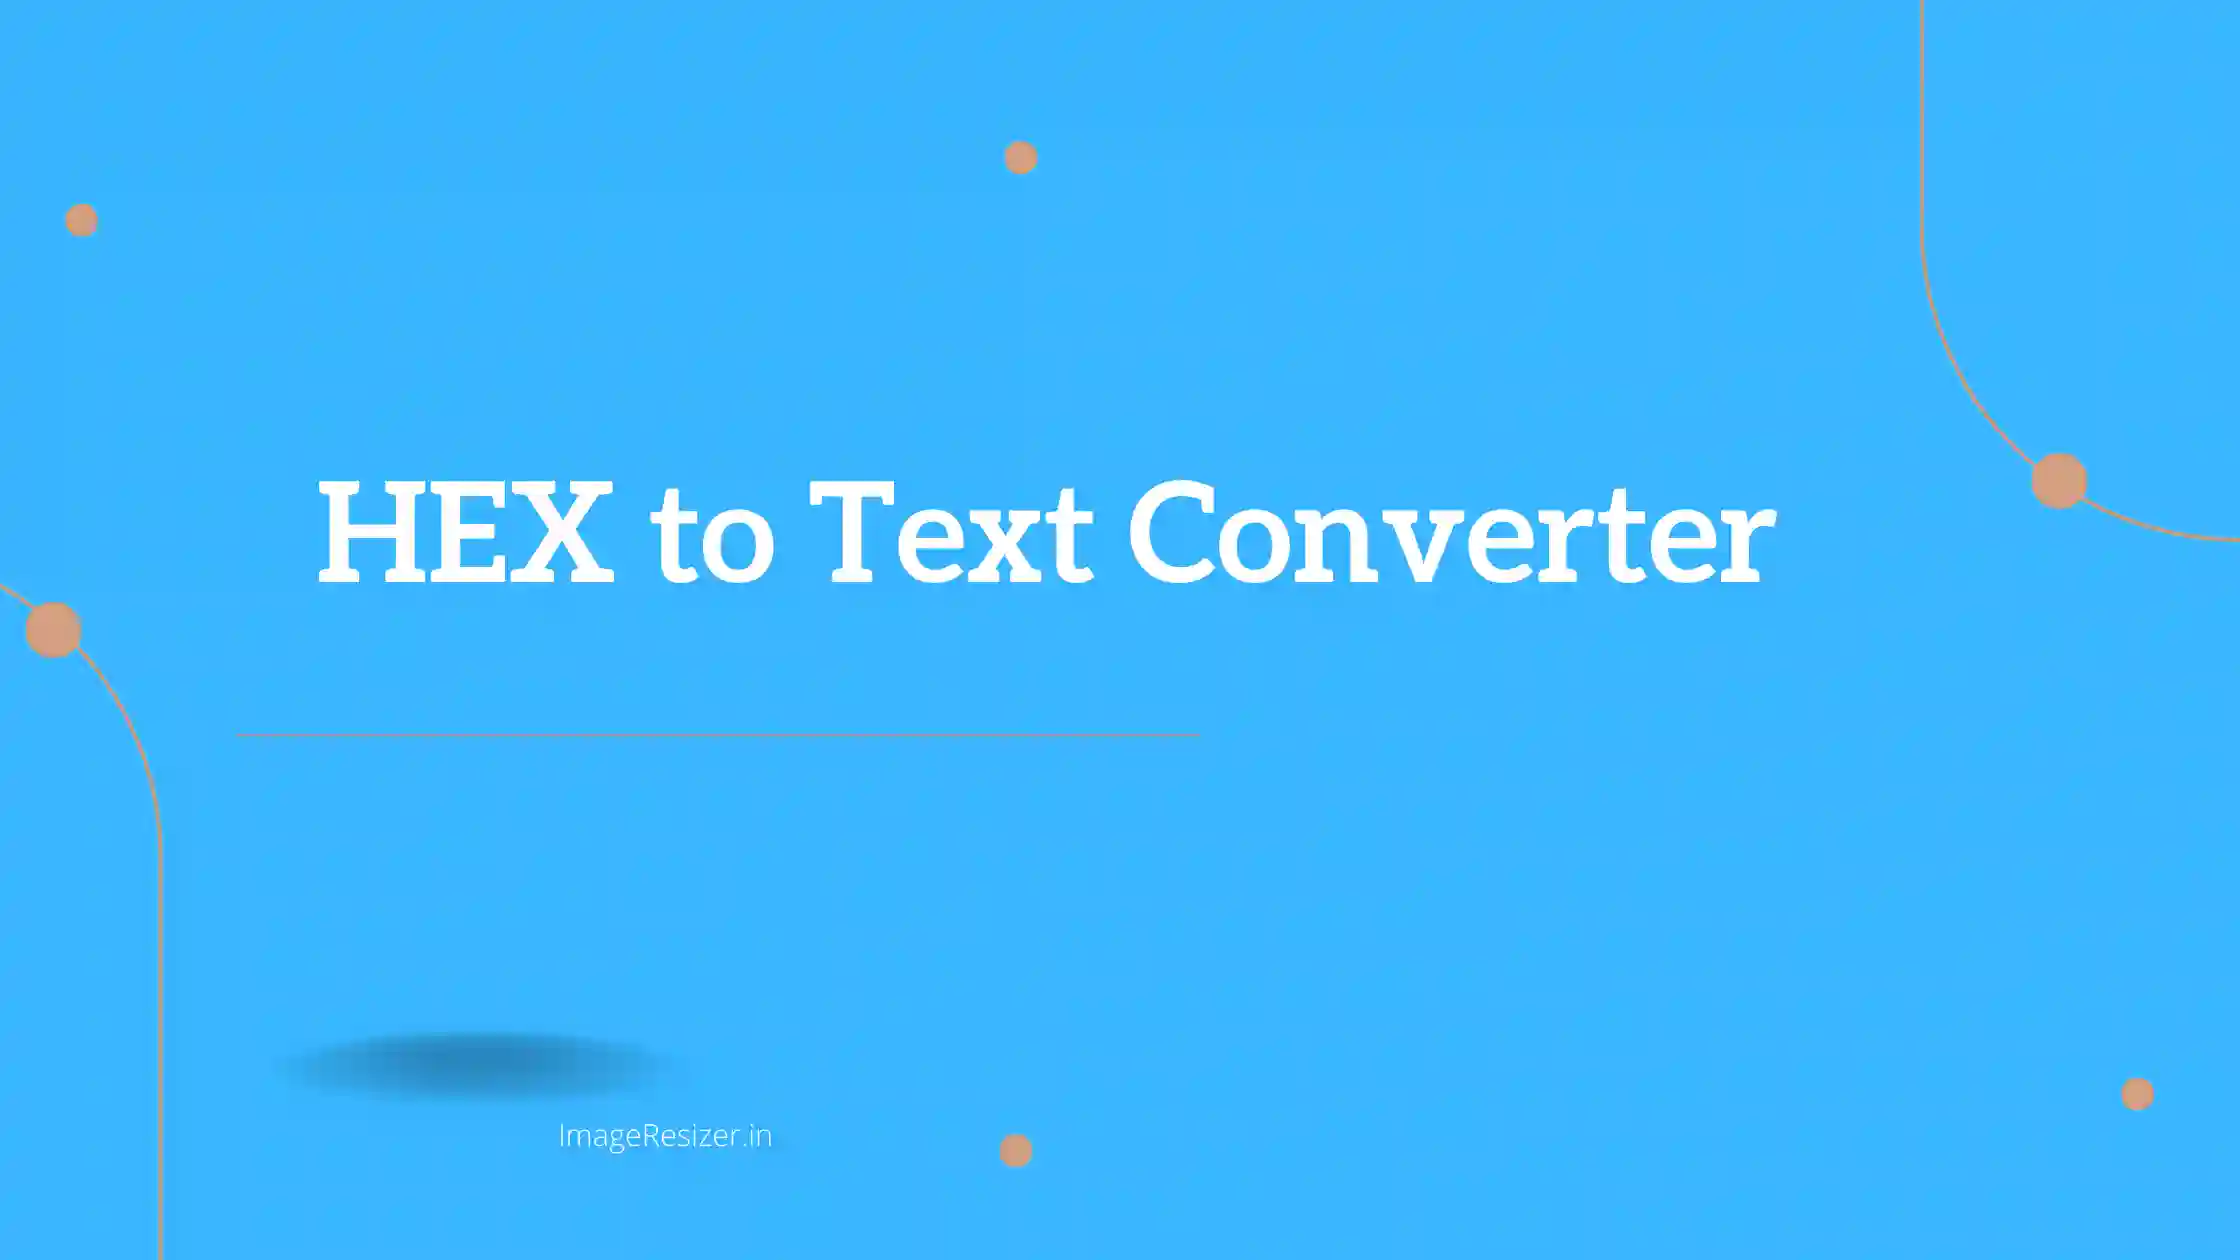 HEX to Text Converter